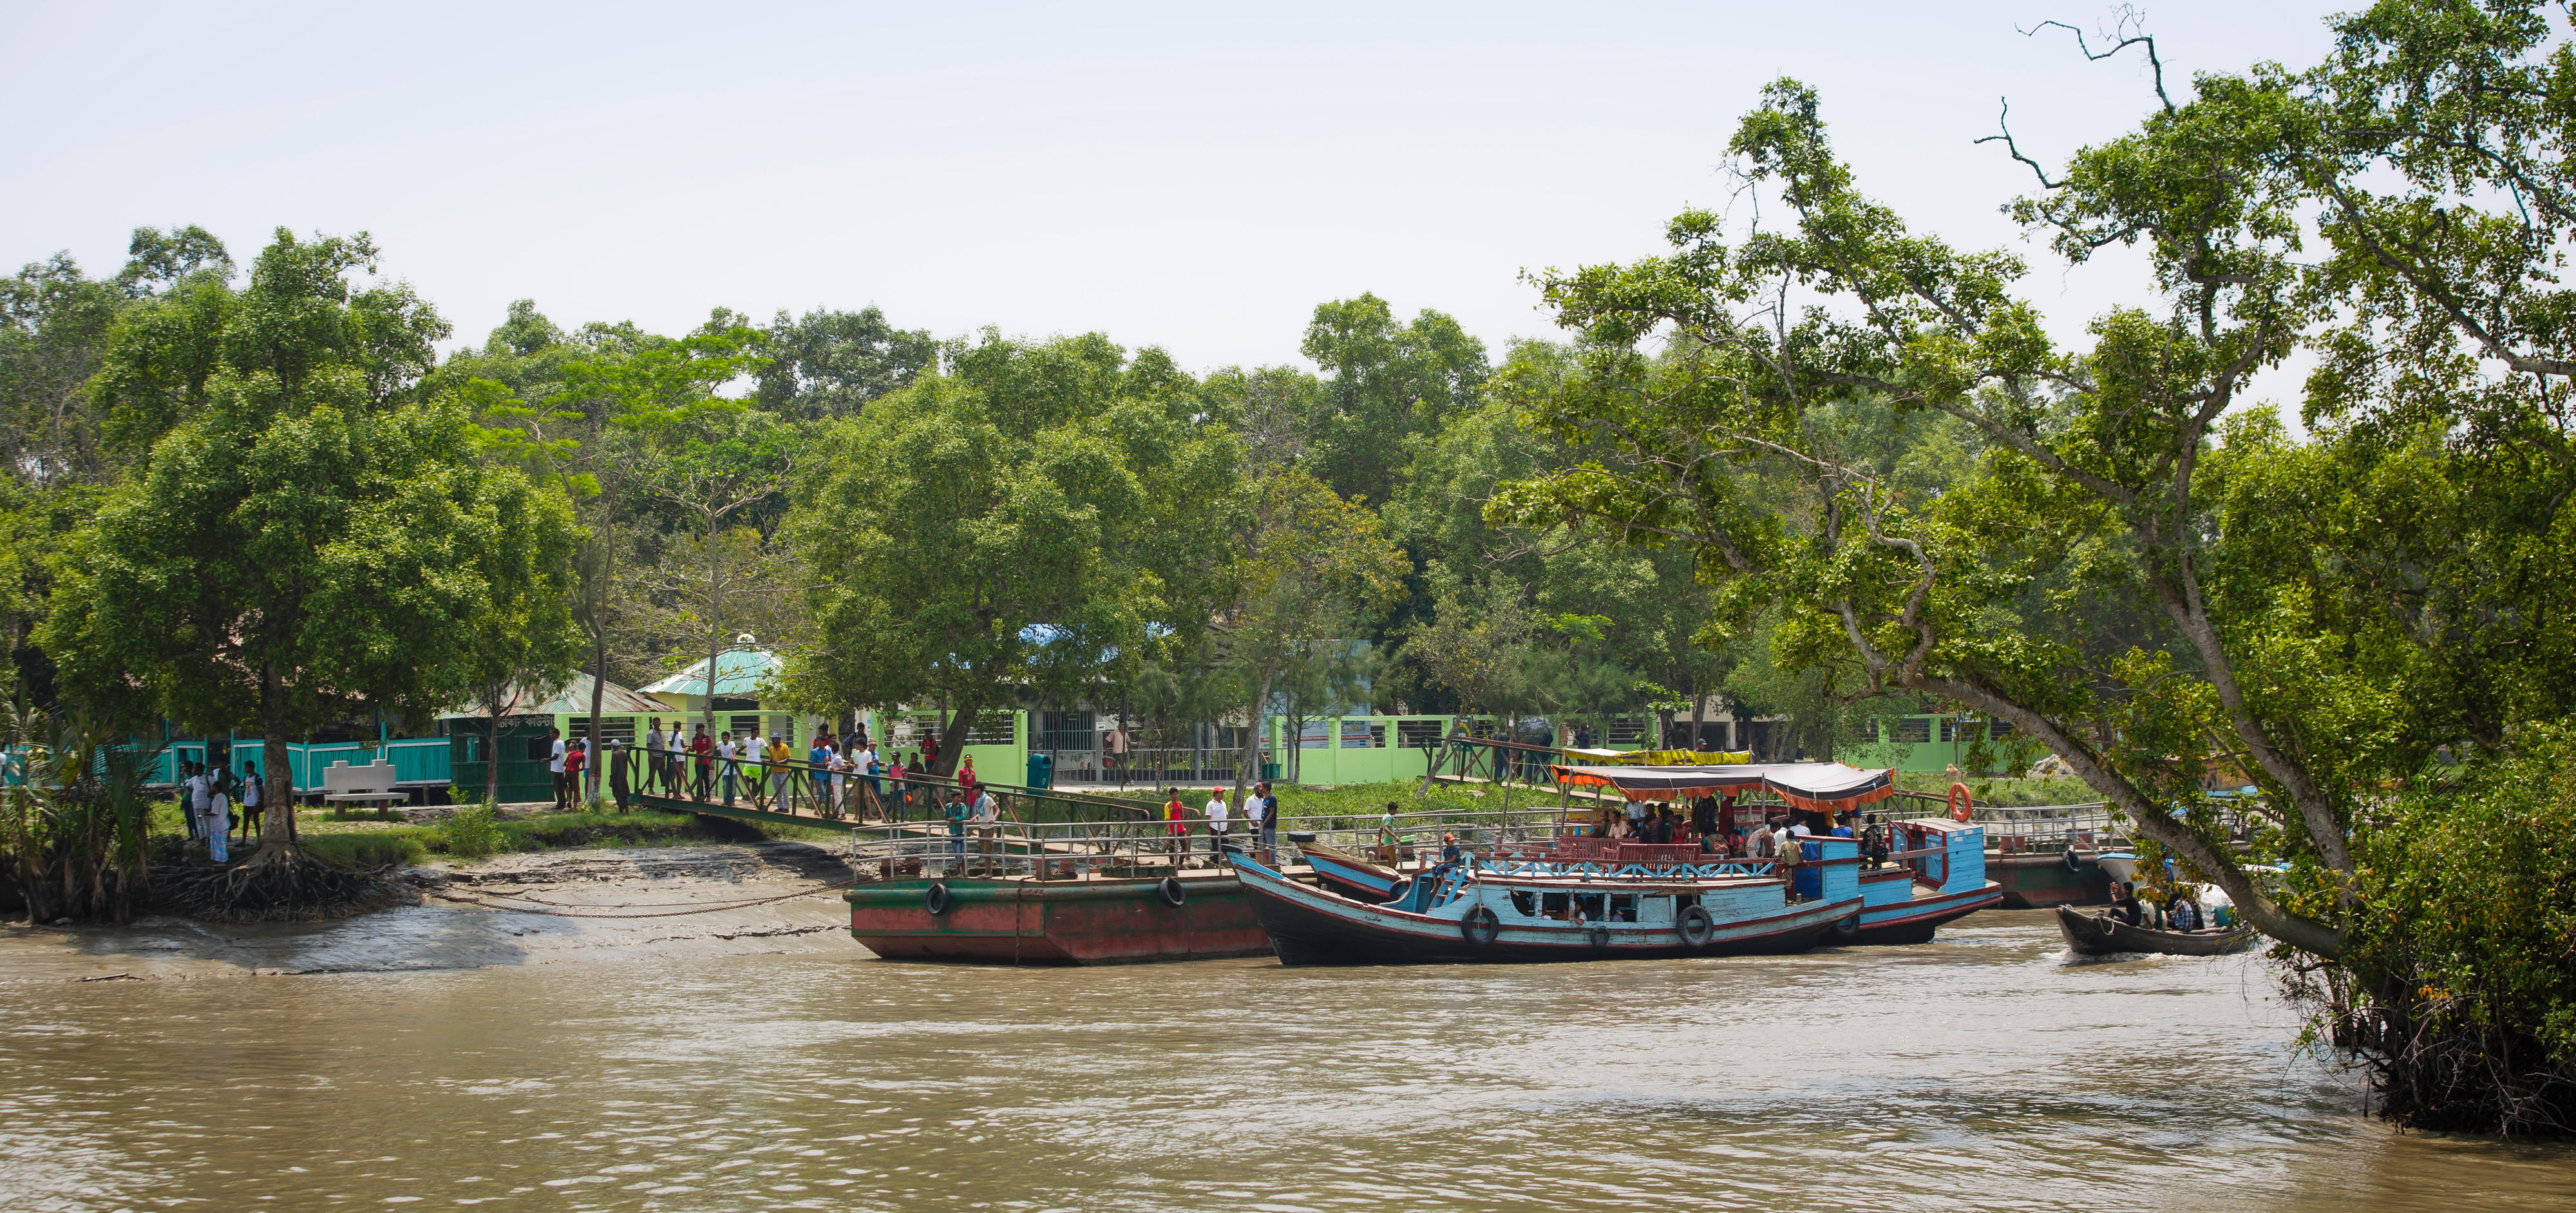 Ship mooring in the Sundarbans, the largest mangrove forests on earth in Bangladesh